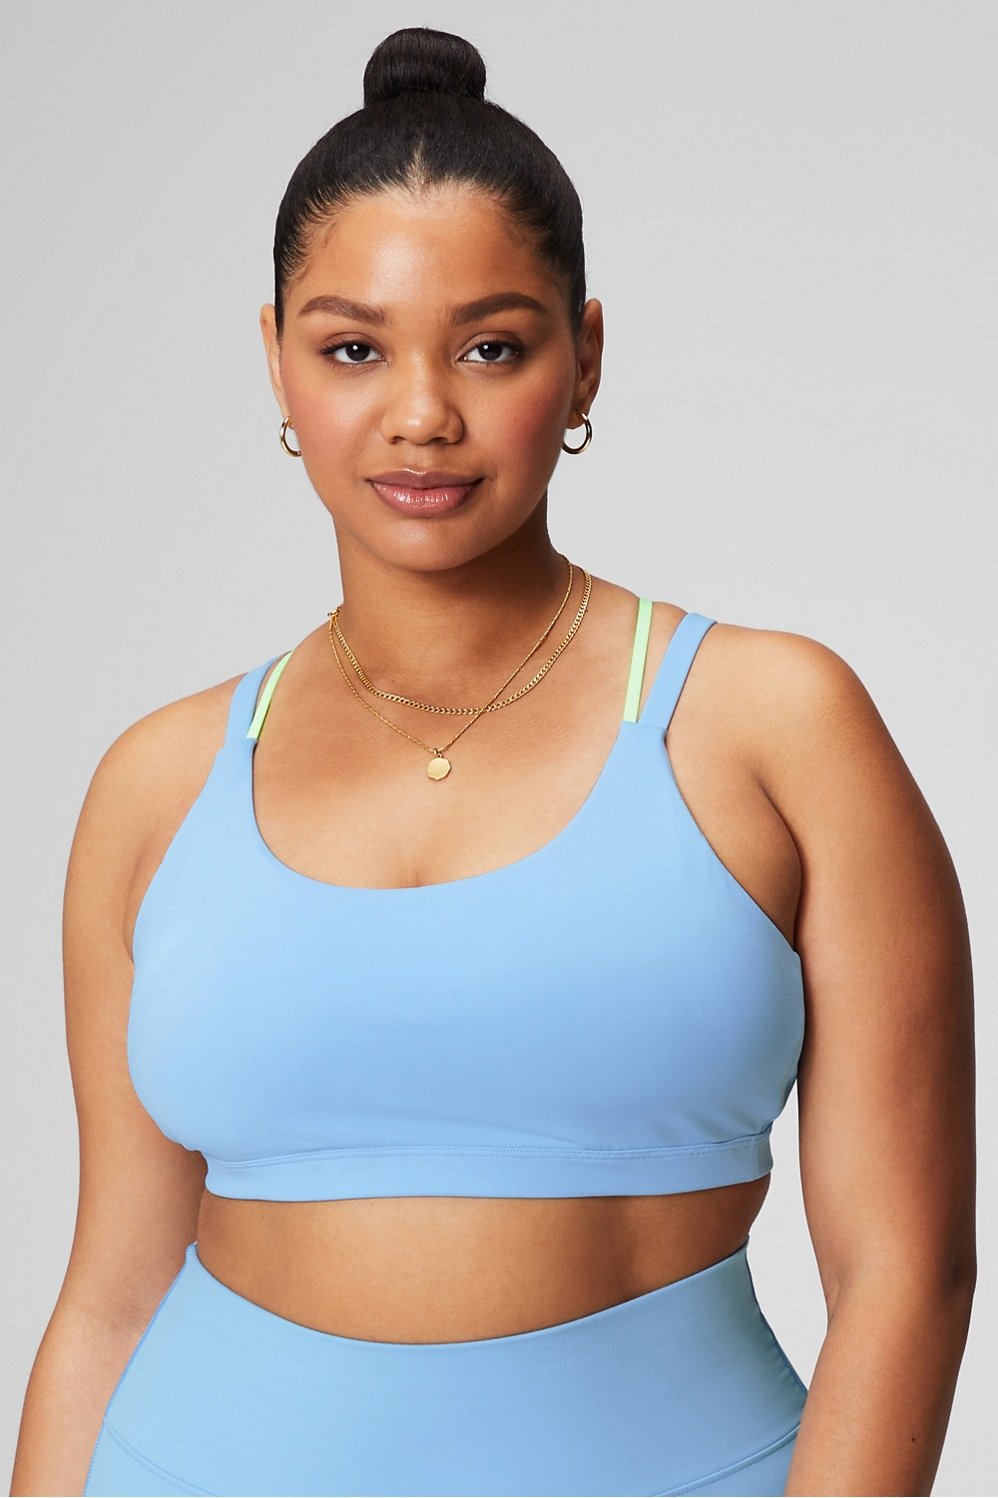 Fabletics women's small athletic Sports bra - $14 - From Megan